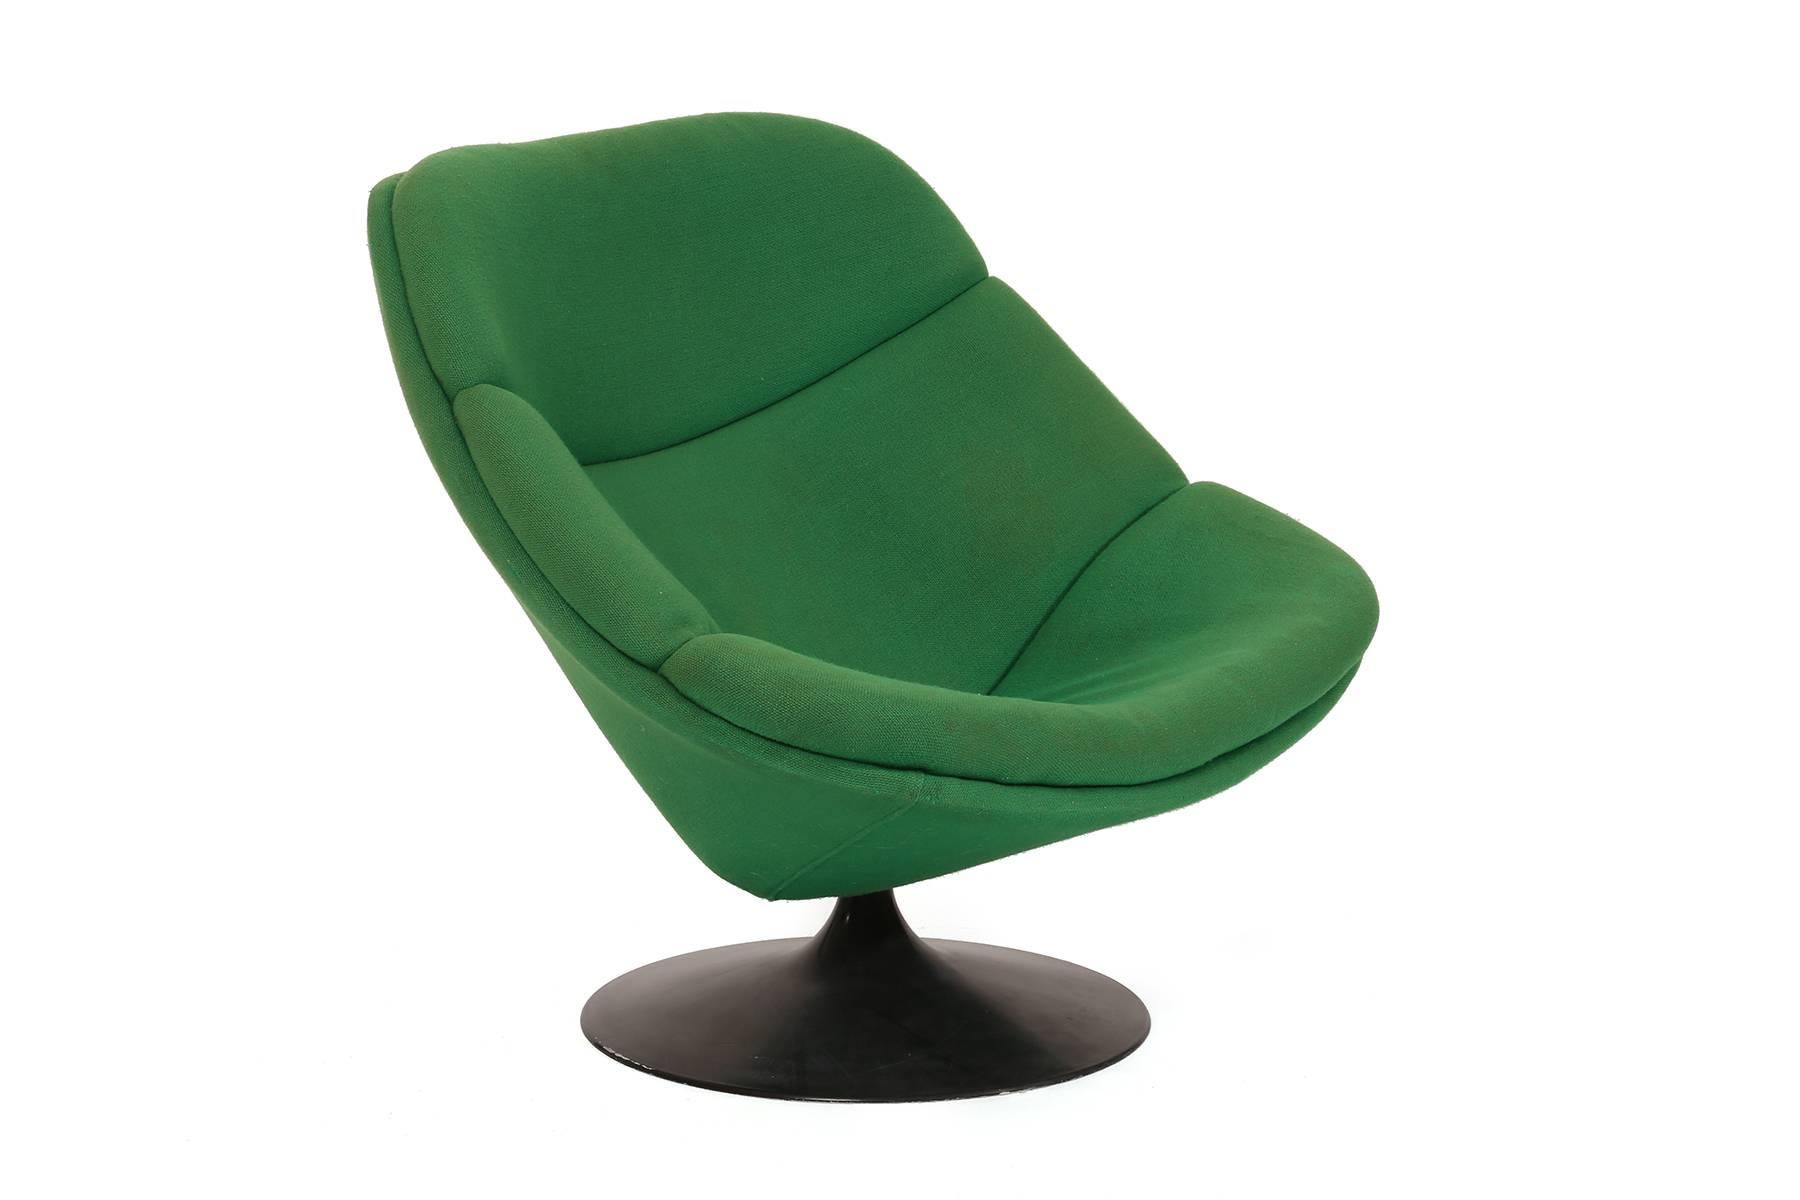 Geoffrey Harcourt for Art fort all original swivel lounge chair, circa mid-1970s. This example retains its original kelly green upholstery above the black tulip base. Upholstery does have some wear but is great as it stands or we can happily